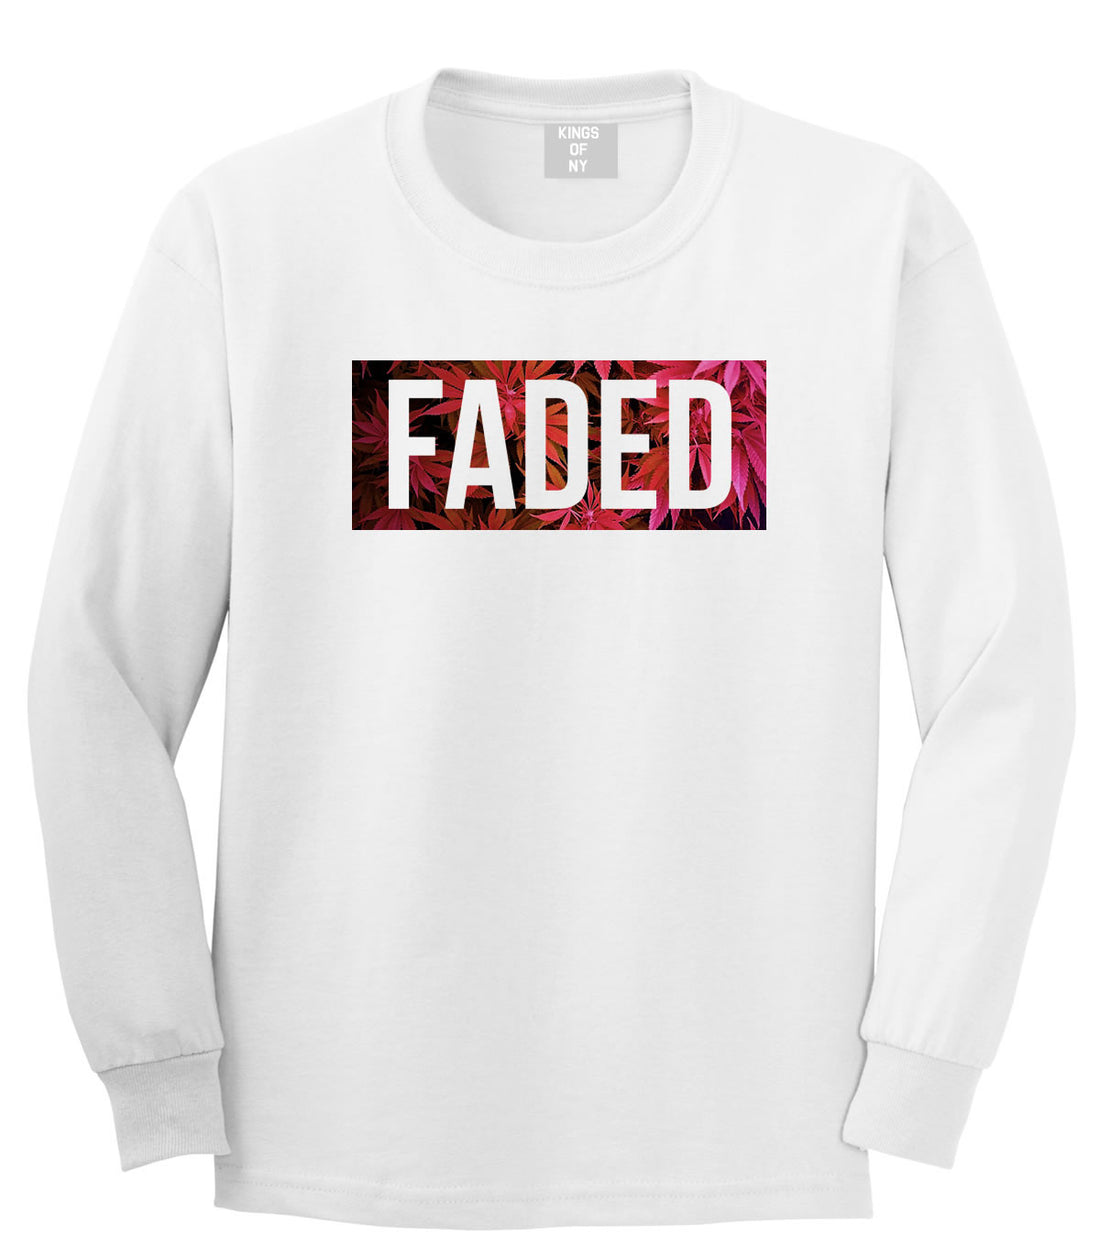 Faded Red and Pink Marijuana Weed Long Sleeve T-Shirt in White by Kings Of NY